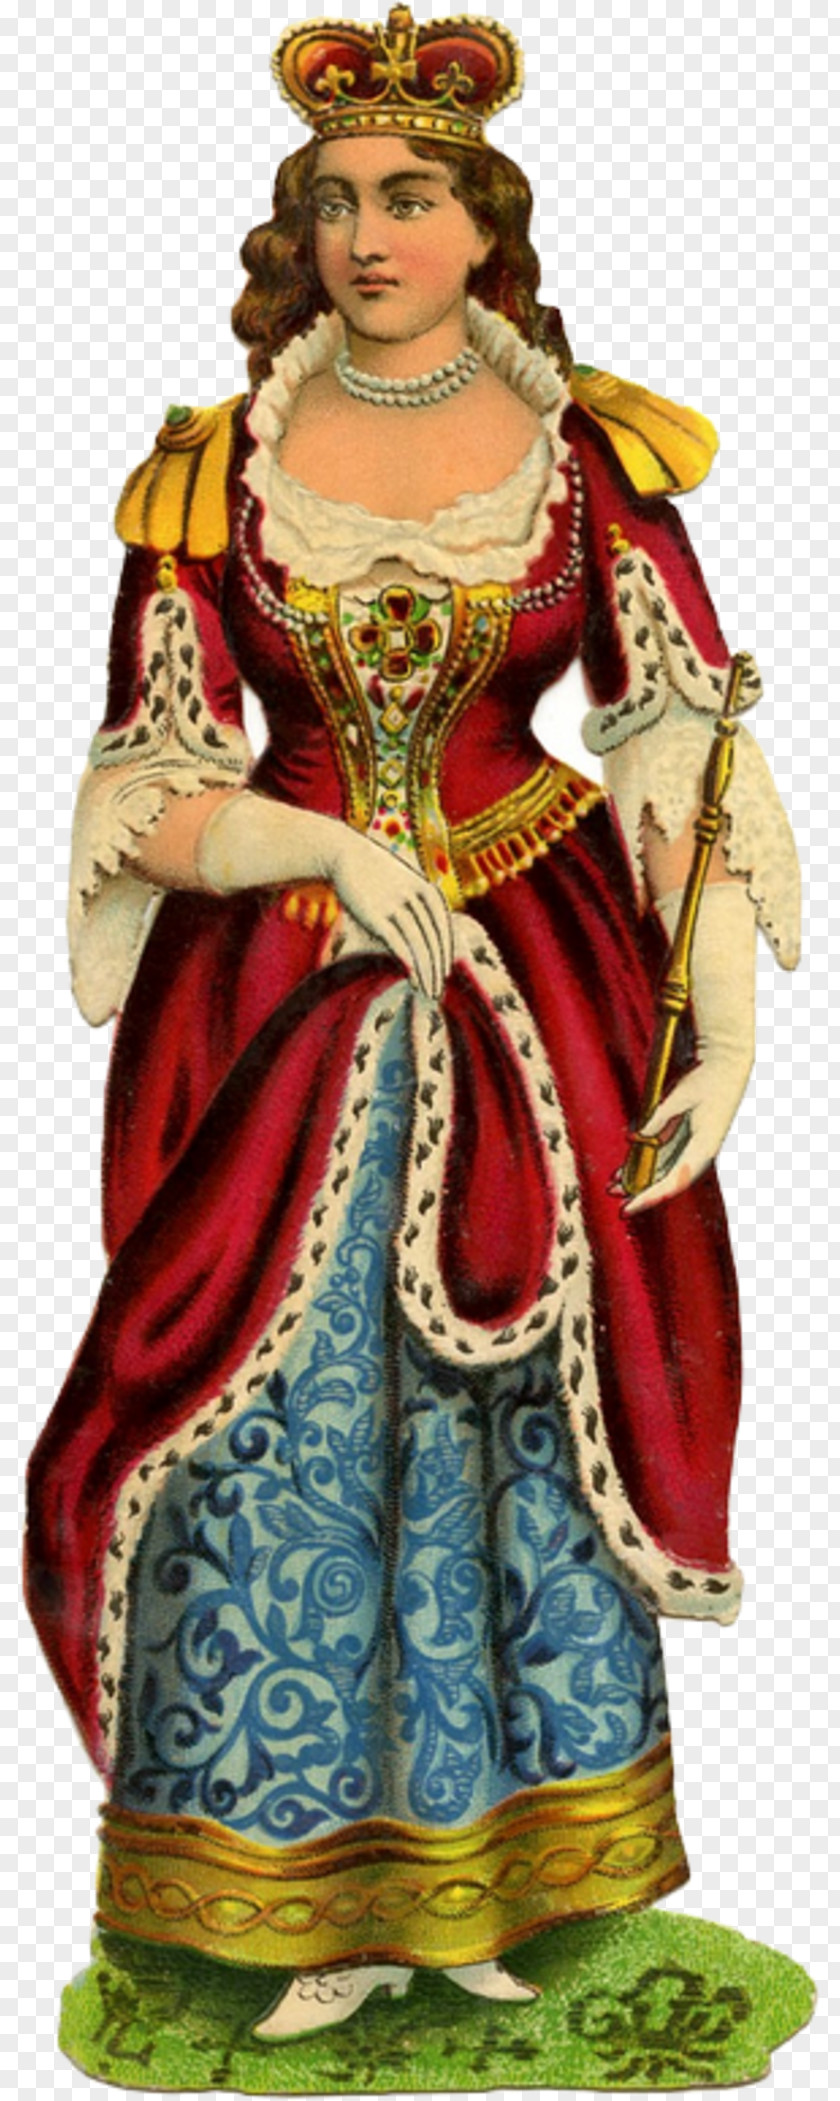 Medieval Woman Clip Art Vector Graphics Image Illustration PNG